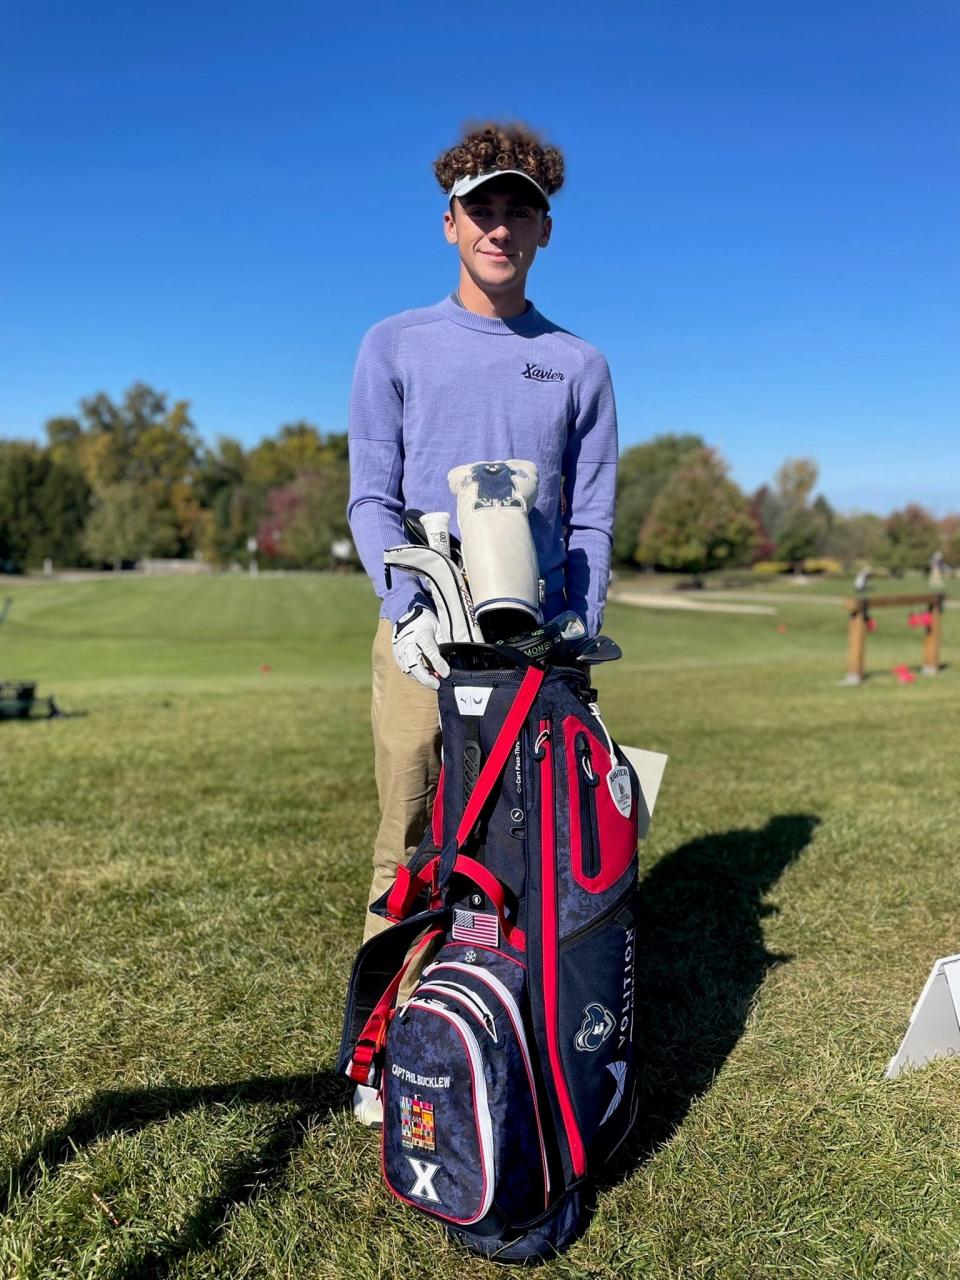 Xavier University men's golfer Mason Witt displays the Phil Bucklew bag. It's a golf bag that's awarded to Xavier's top golfer and commemorates the life and military service of 1936 Xavier grad, Captain Phil Bucklew.